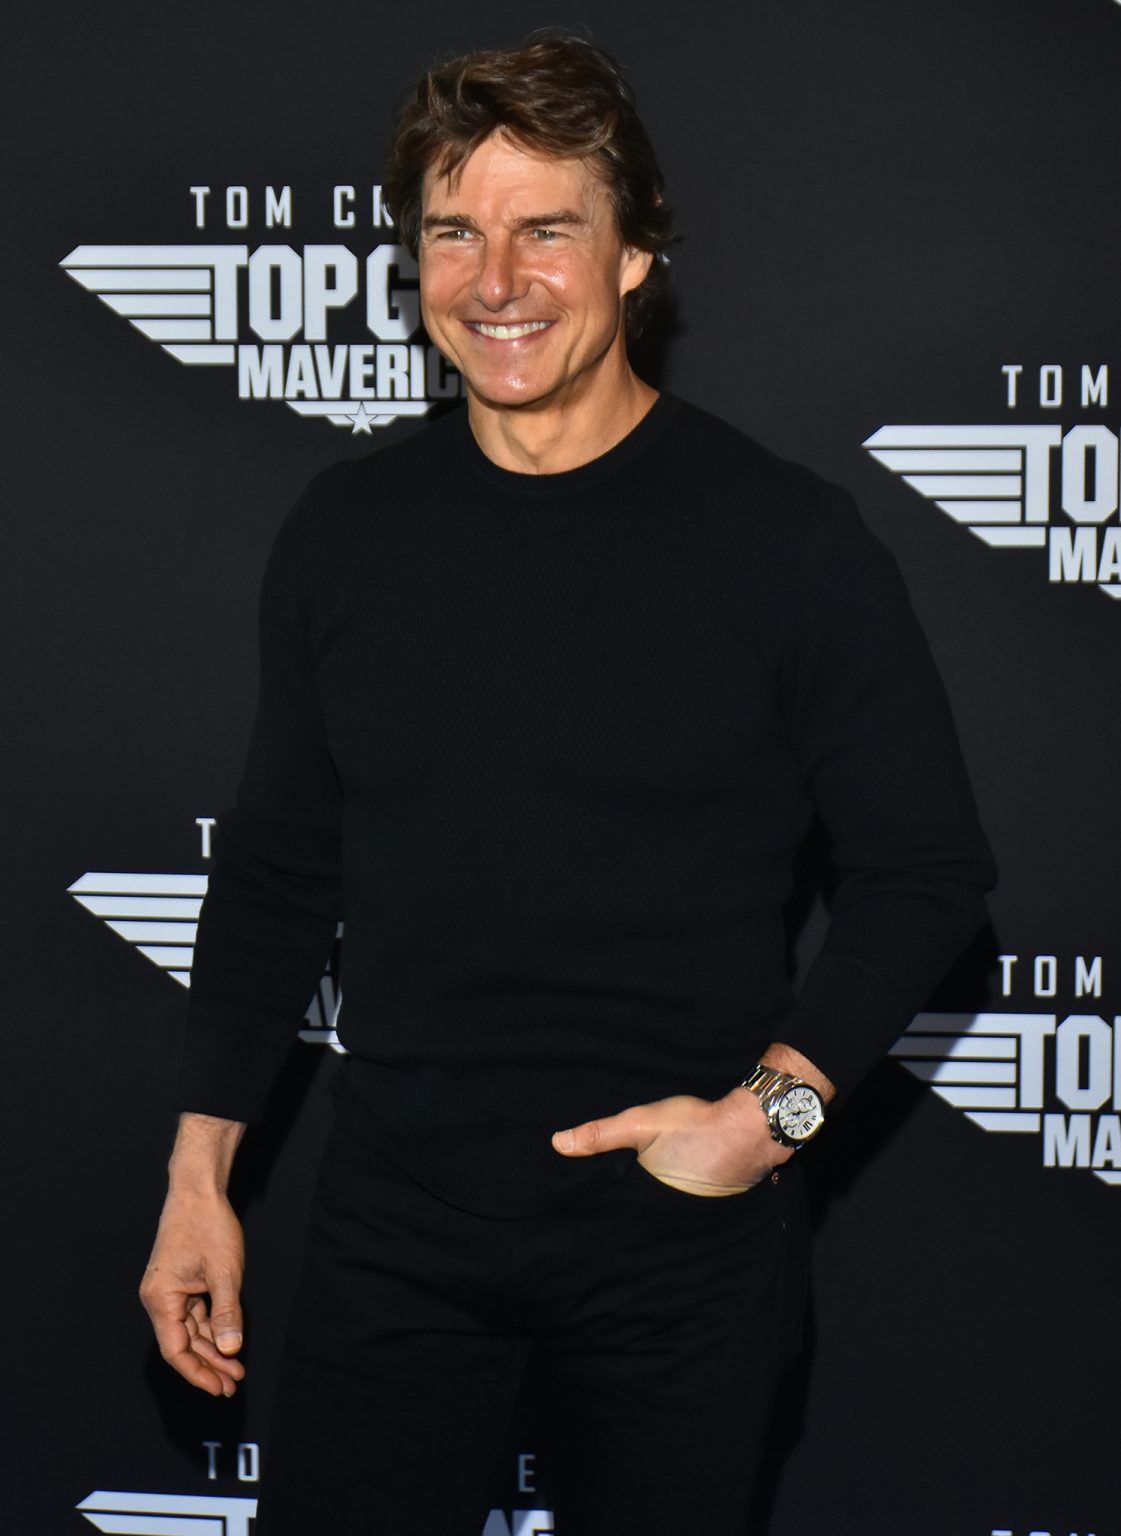 Tom Cruise's Net Worth How He Became a Hollywood Mogul